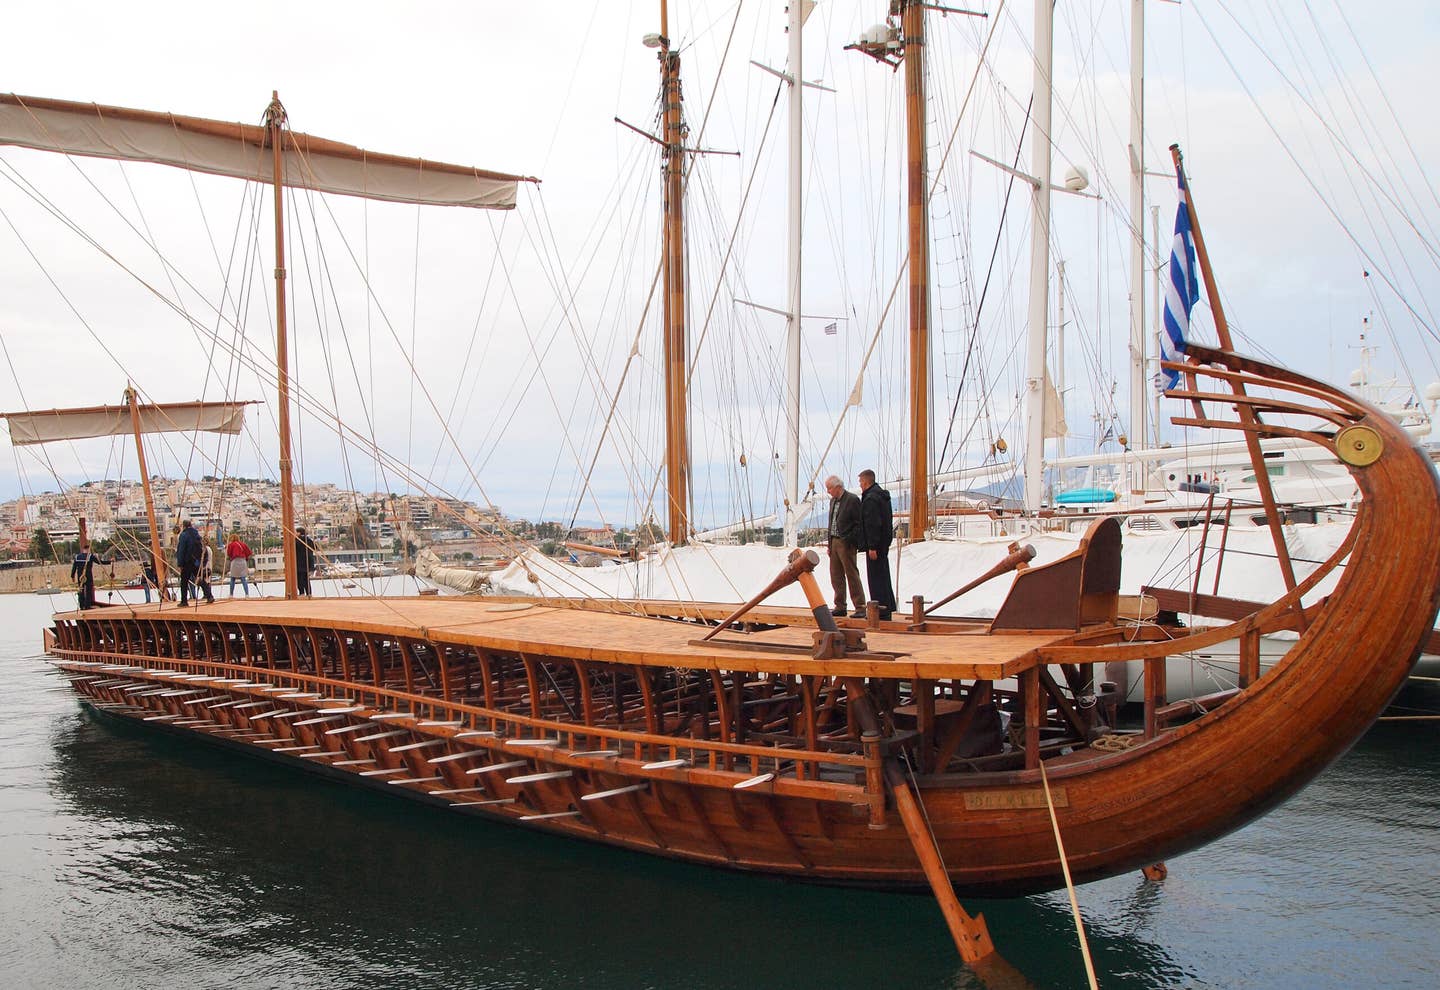 The replica trireme <em>Olympias</em> at Marina Zeas, Piraeus, Greece, on May 4, 2019. Initially, the trireme was used as part of an experimental archeological project, in order for scientists to determine the sailing characteristics, battle tactics and living conditions inside the vessel. <em>Photo by Grigoris Siamidis/NurPhoto via Getty Images</em>